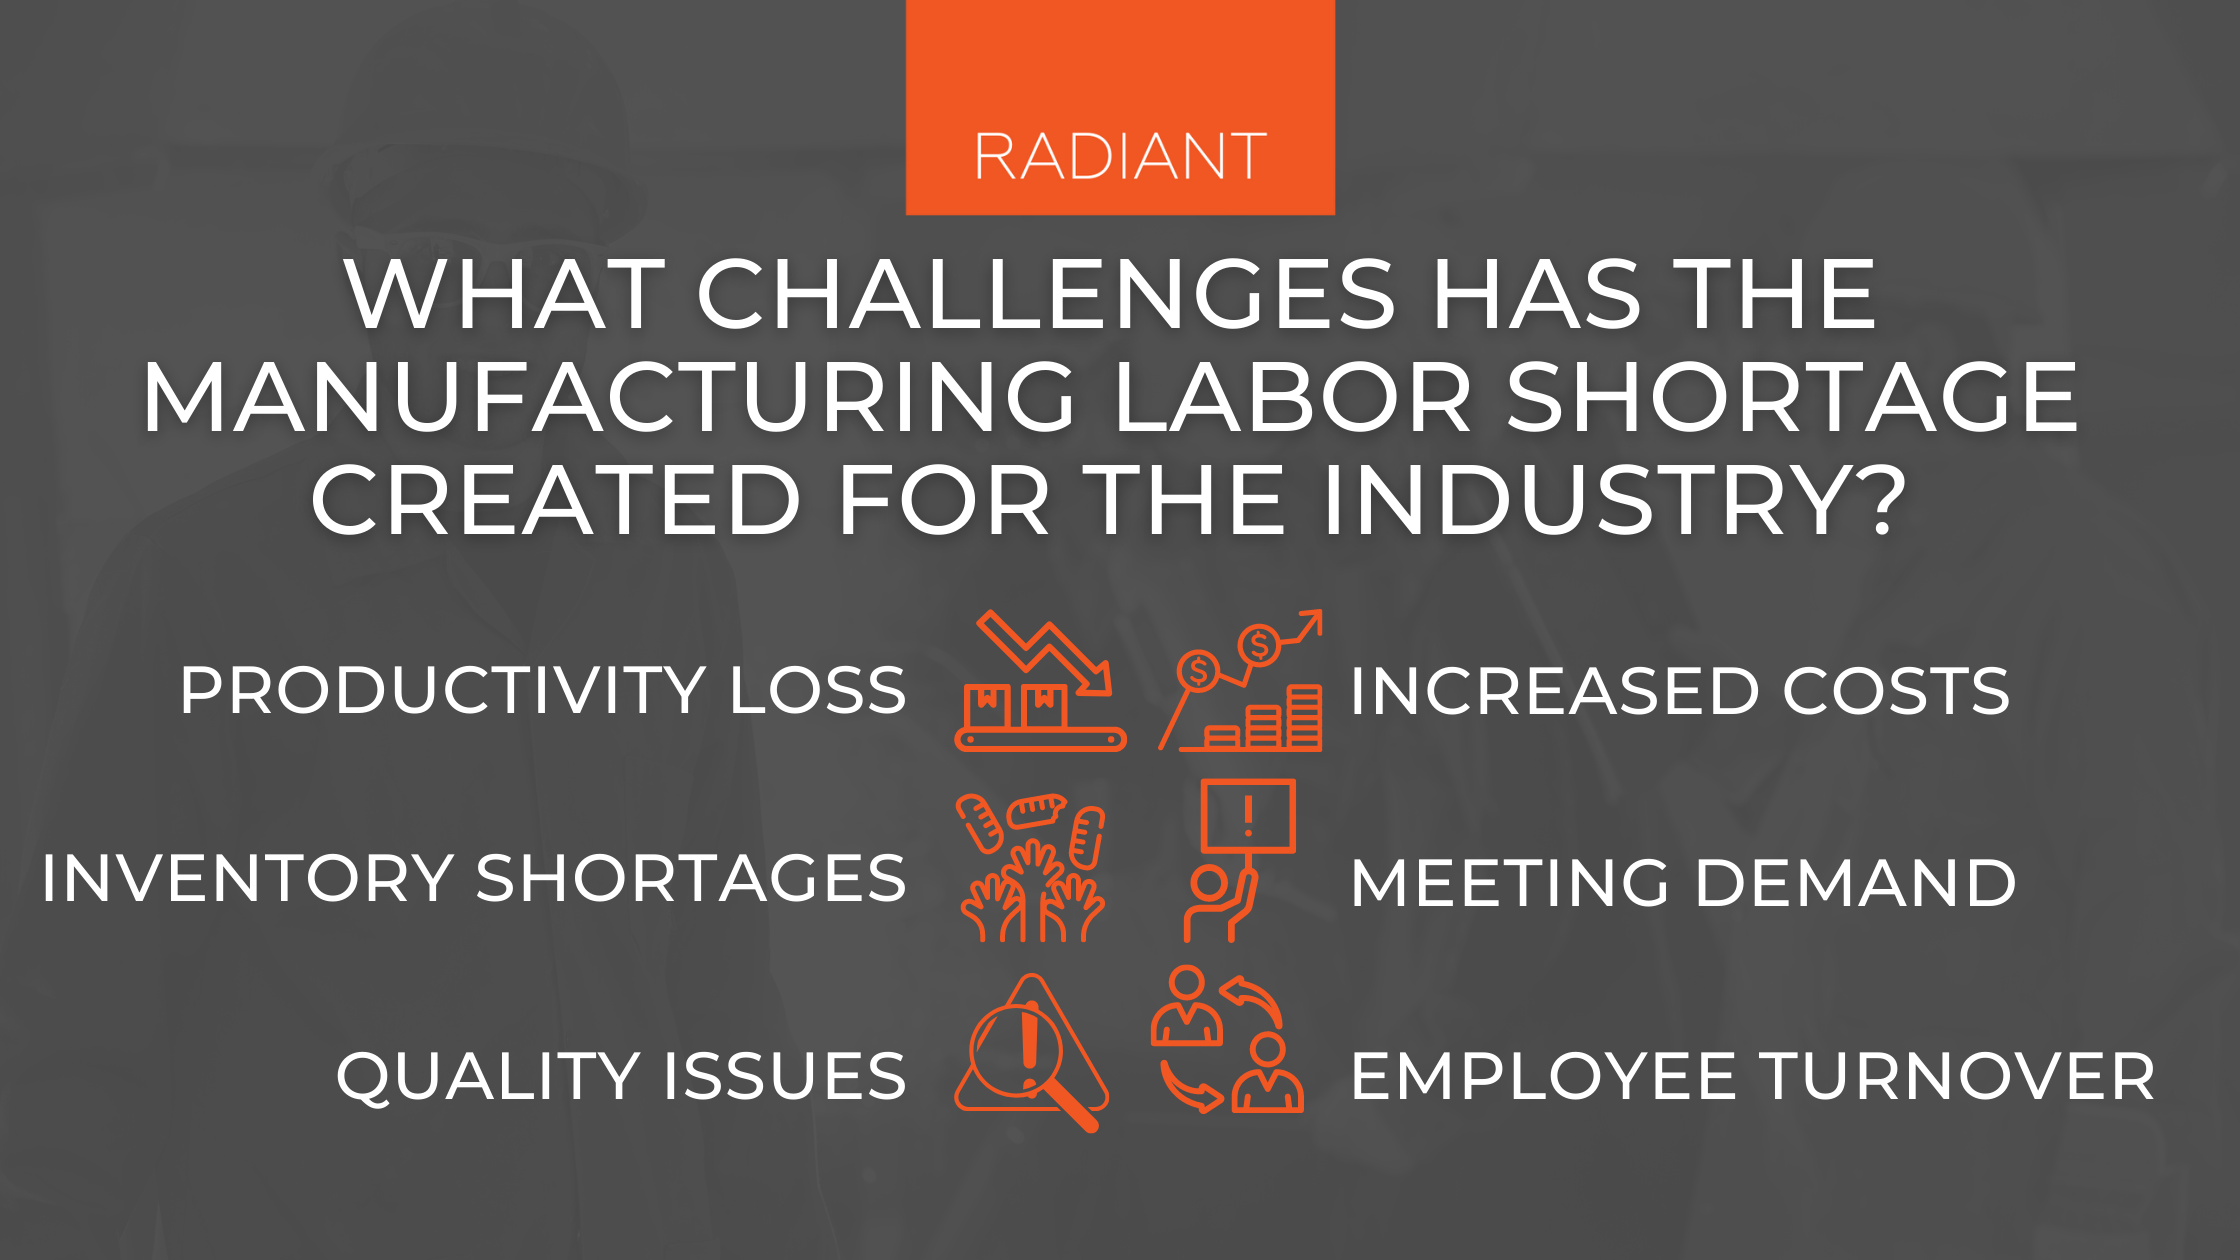 Manufacturing Labor Shortage - Iot Solutions For Manufacturing - IoT Solutions - Labor Shortage In Manufacturing - Shortage Of Skilled Workers In Manufacturing - Leverage Technology - Skilled Labor Shortage In Manufacturing - Labor Shortage Manufacturing - Manufacturing Worker Shortage - Manufacturing Sector - National Association Of Manufacturers - IoT Asset Tracking - IoT Asset Management